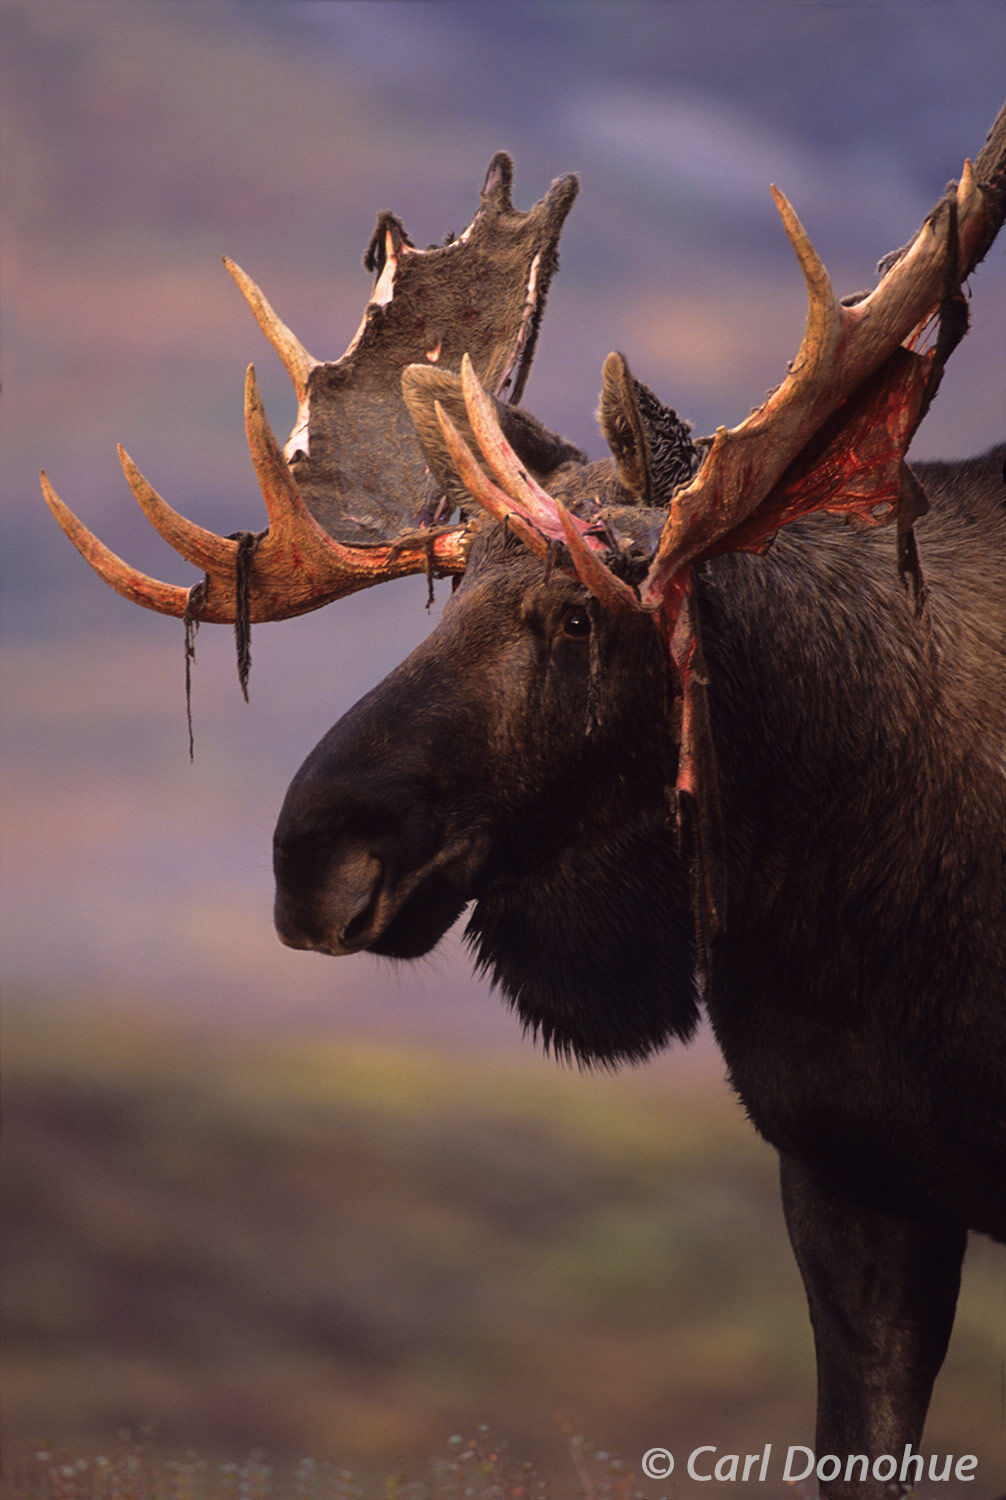 Fall is a season of change and the rutting season also brings change to the moose. During this time the bulls shed their velvet...